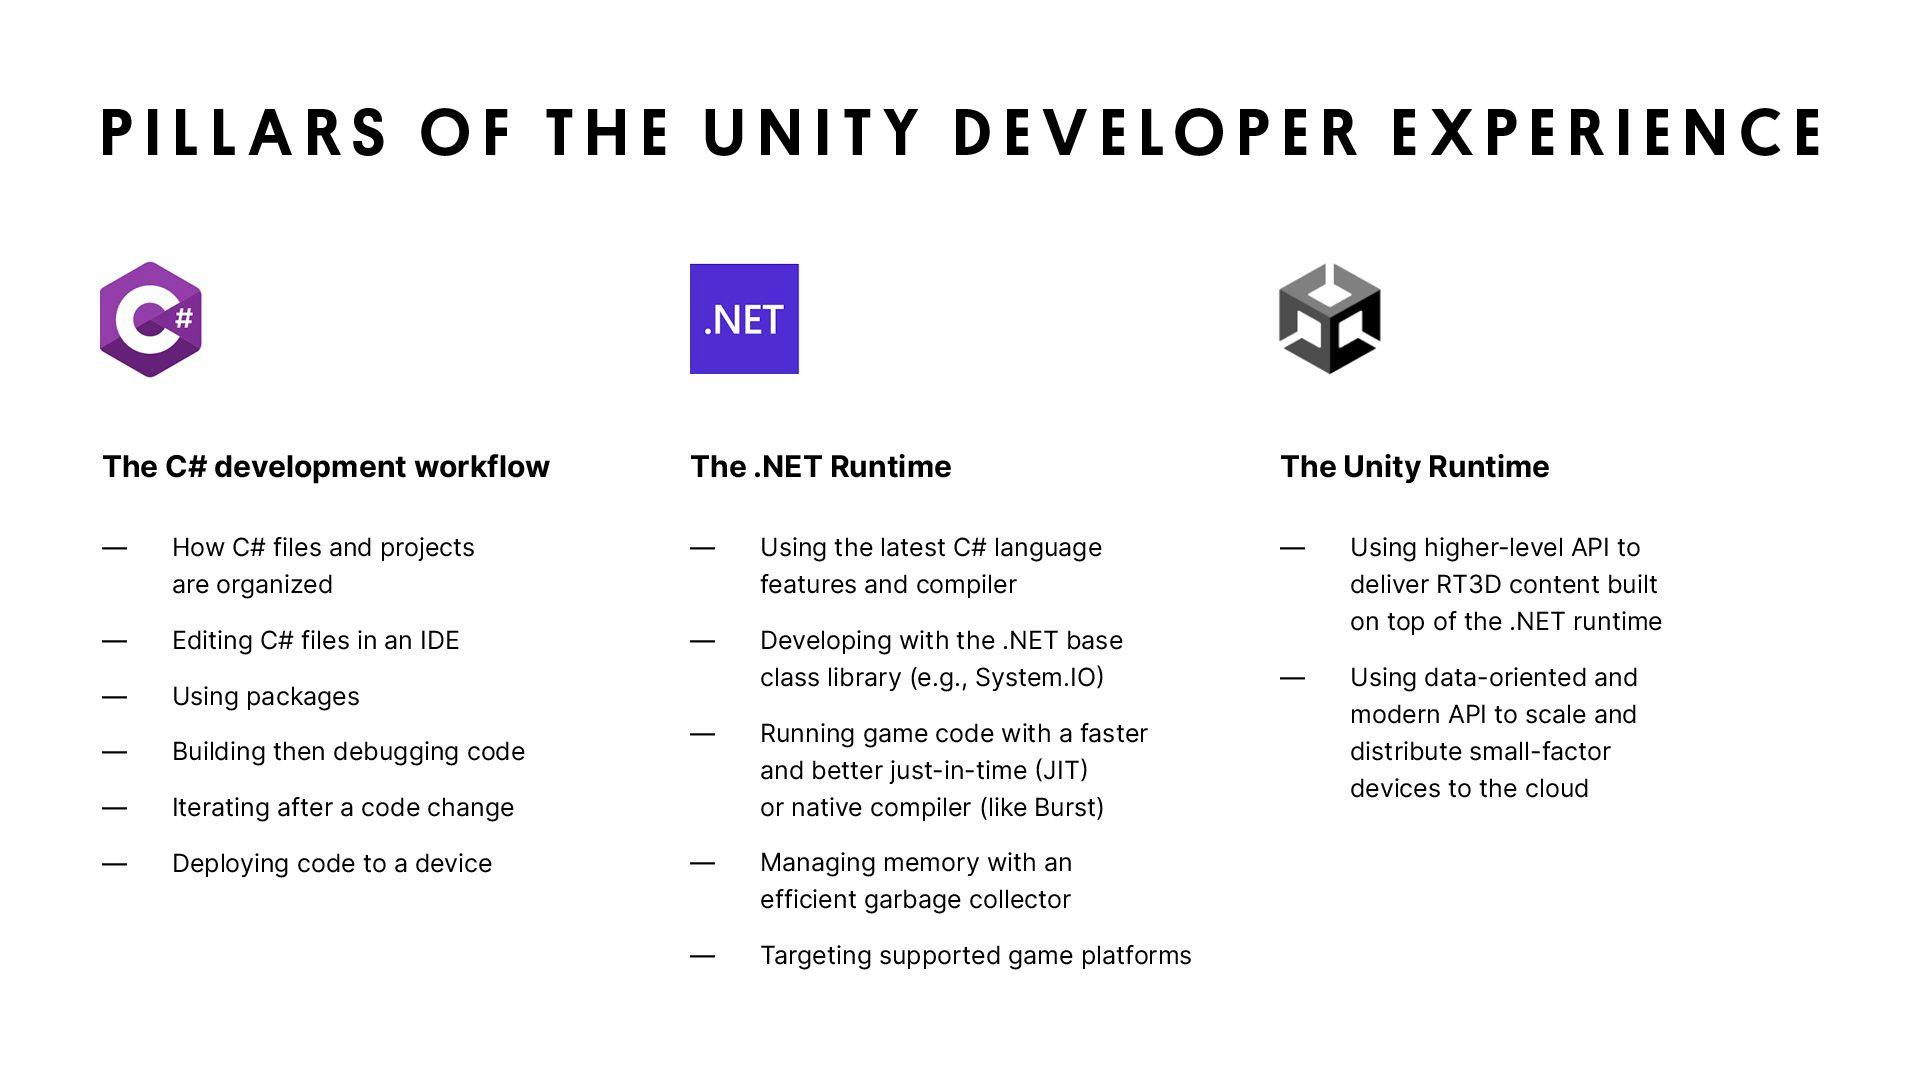 An infographic of the pillars of Unity Developer Experience